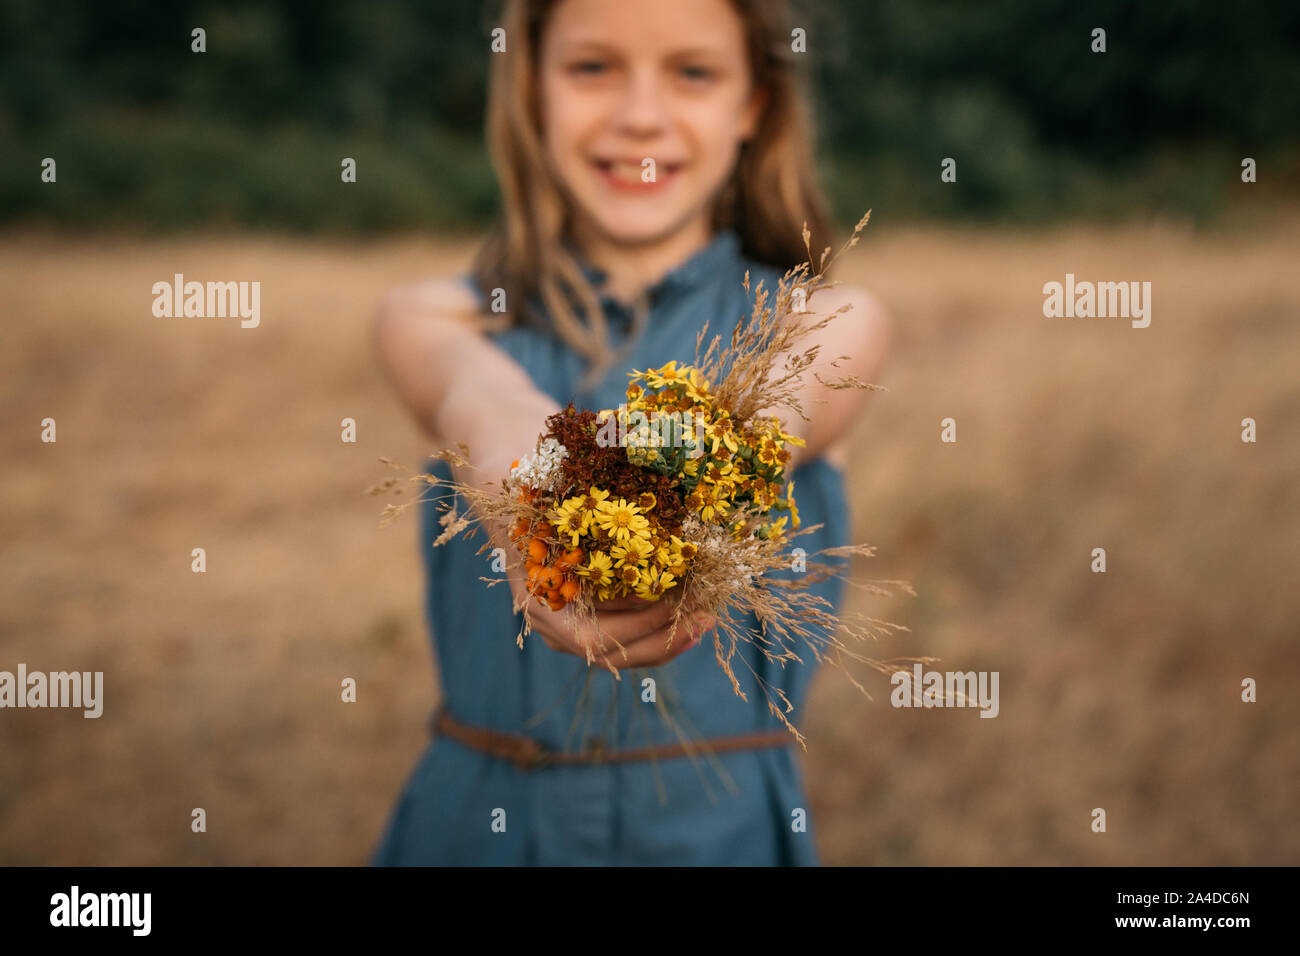 Smiling Girl standing in a field holding a bunch of wildflowers, Netherlands Stock Photo